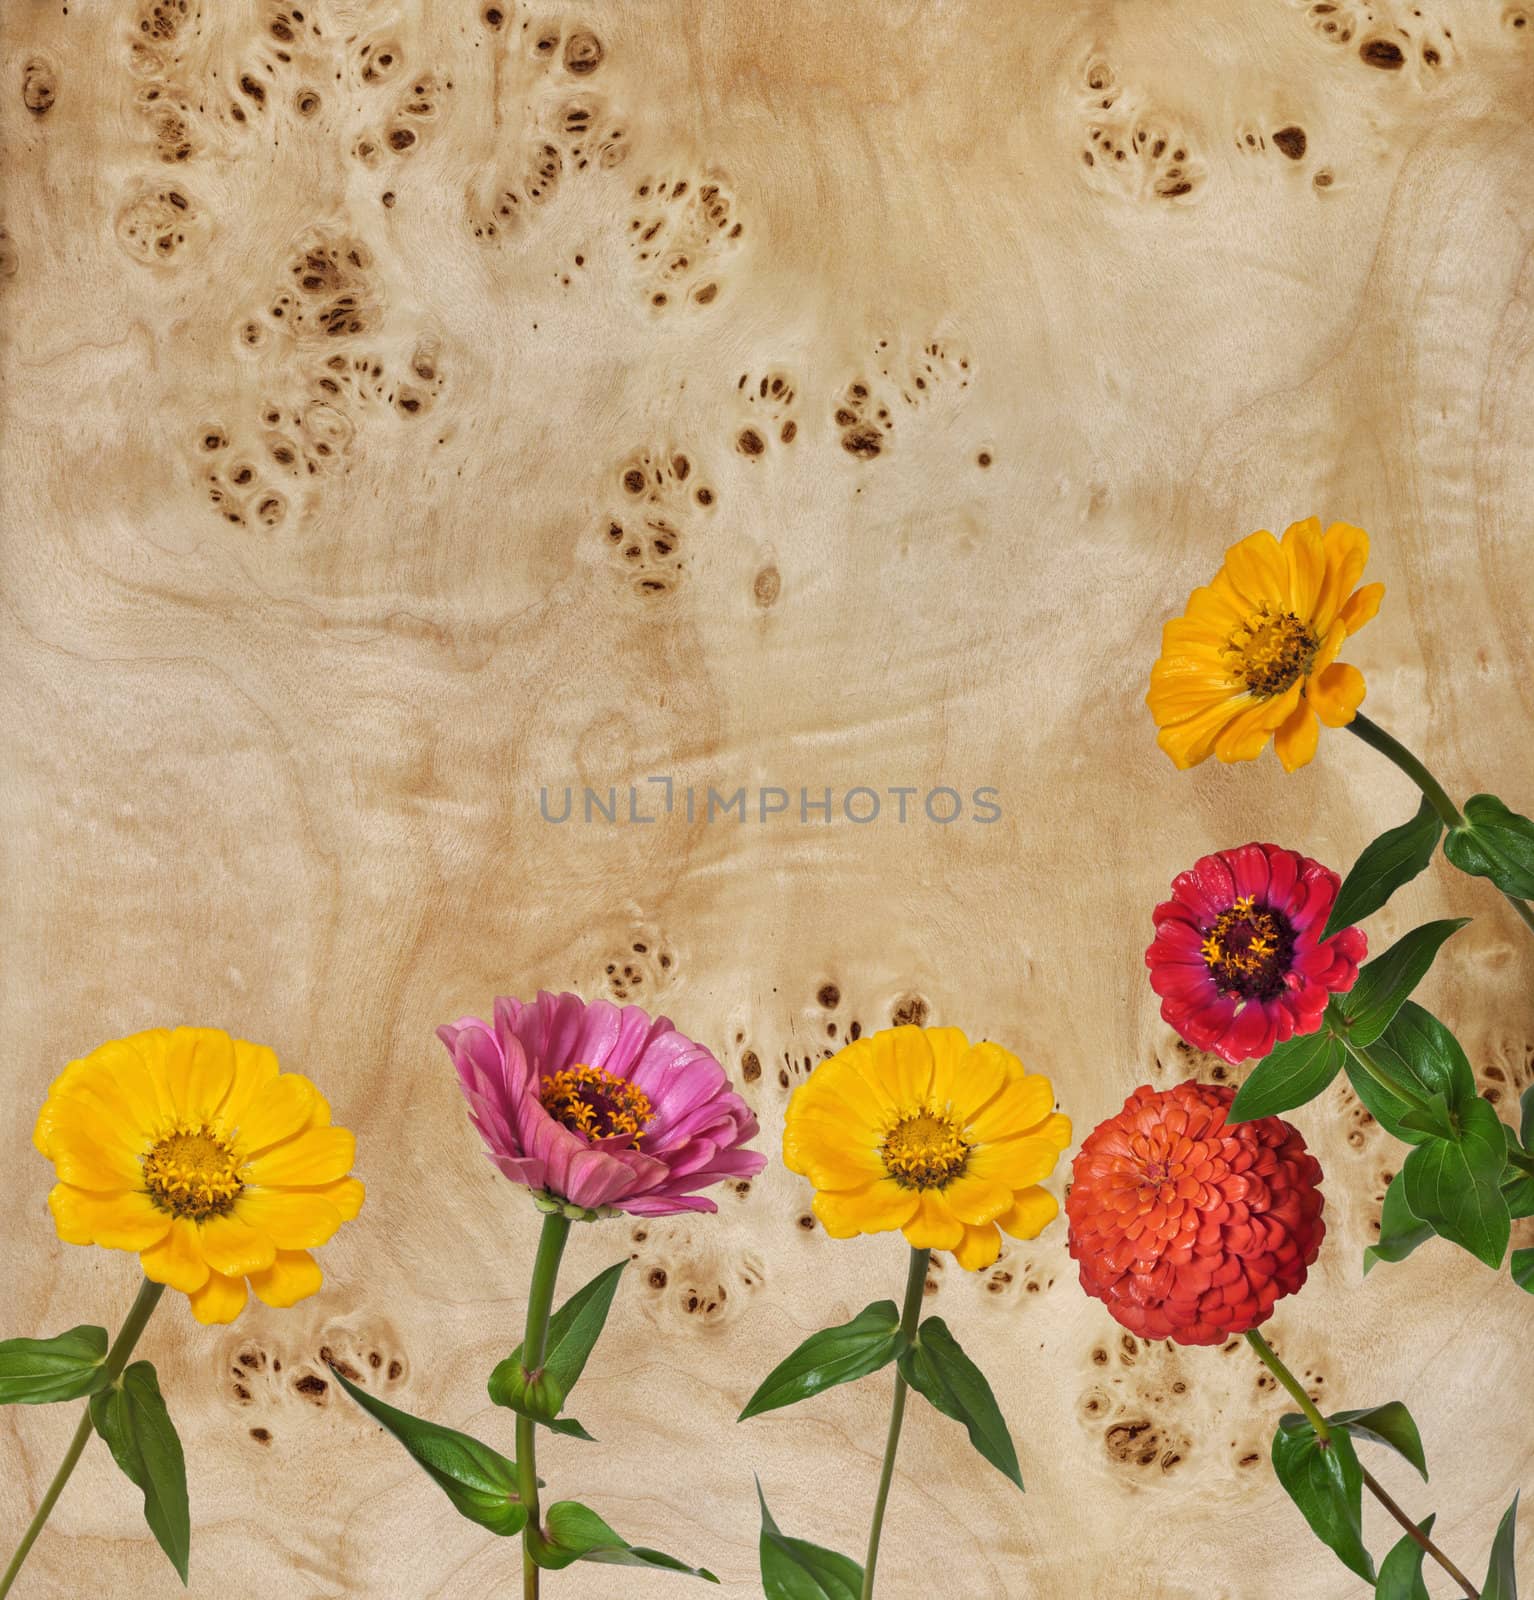 Flowers Zinnia with green leaves and veneer of tree, root of a poplar